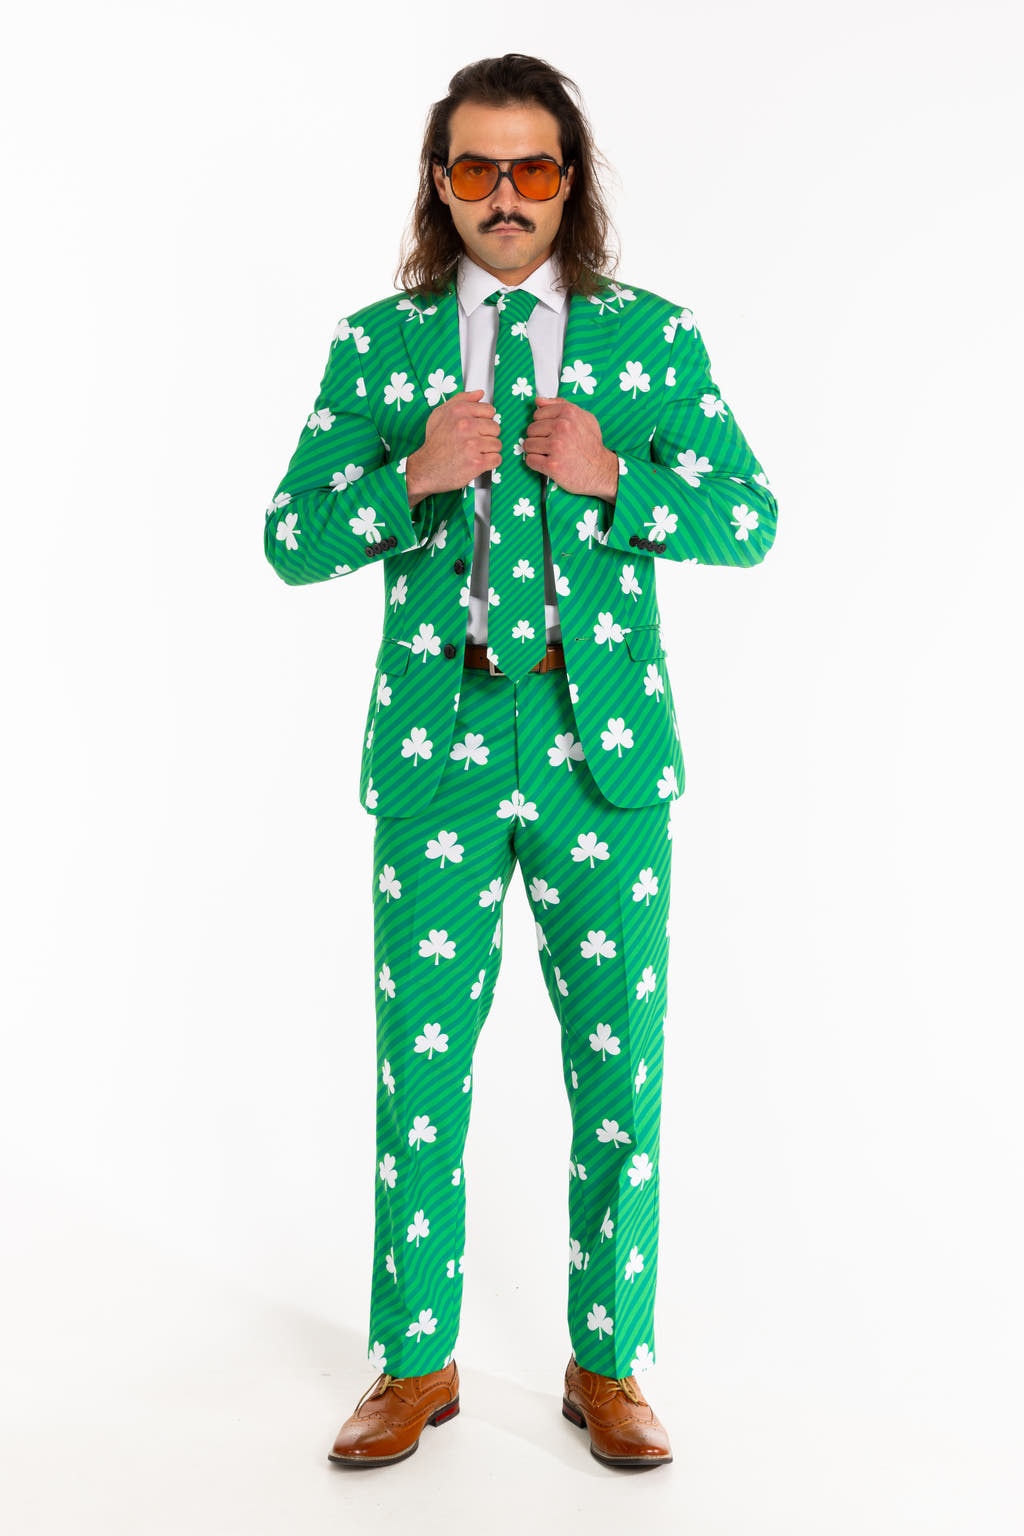 The Blarney Bagpiper | Diagonal Striped Clovers Suit